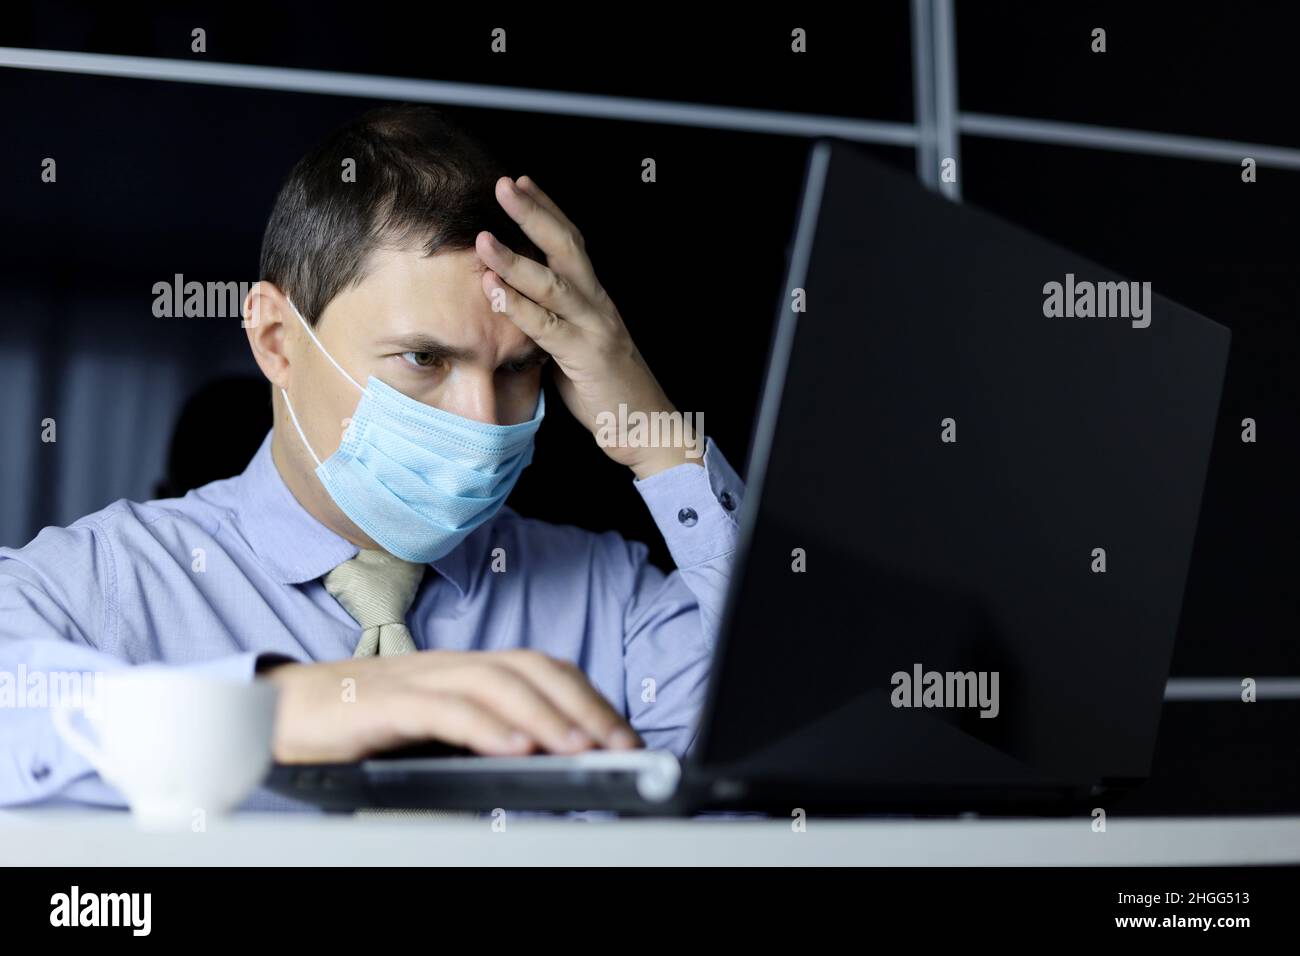 Man in face mask and office clothes looking focused at laptop display. Concept of solving a difficult task Stock Photo